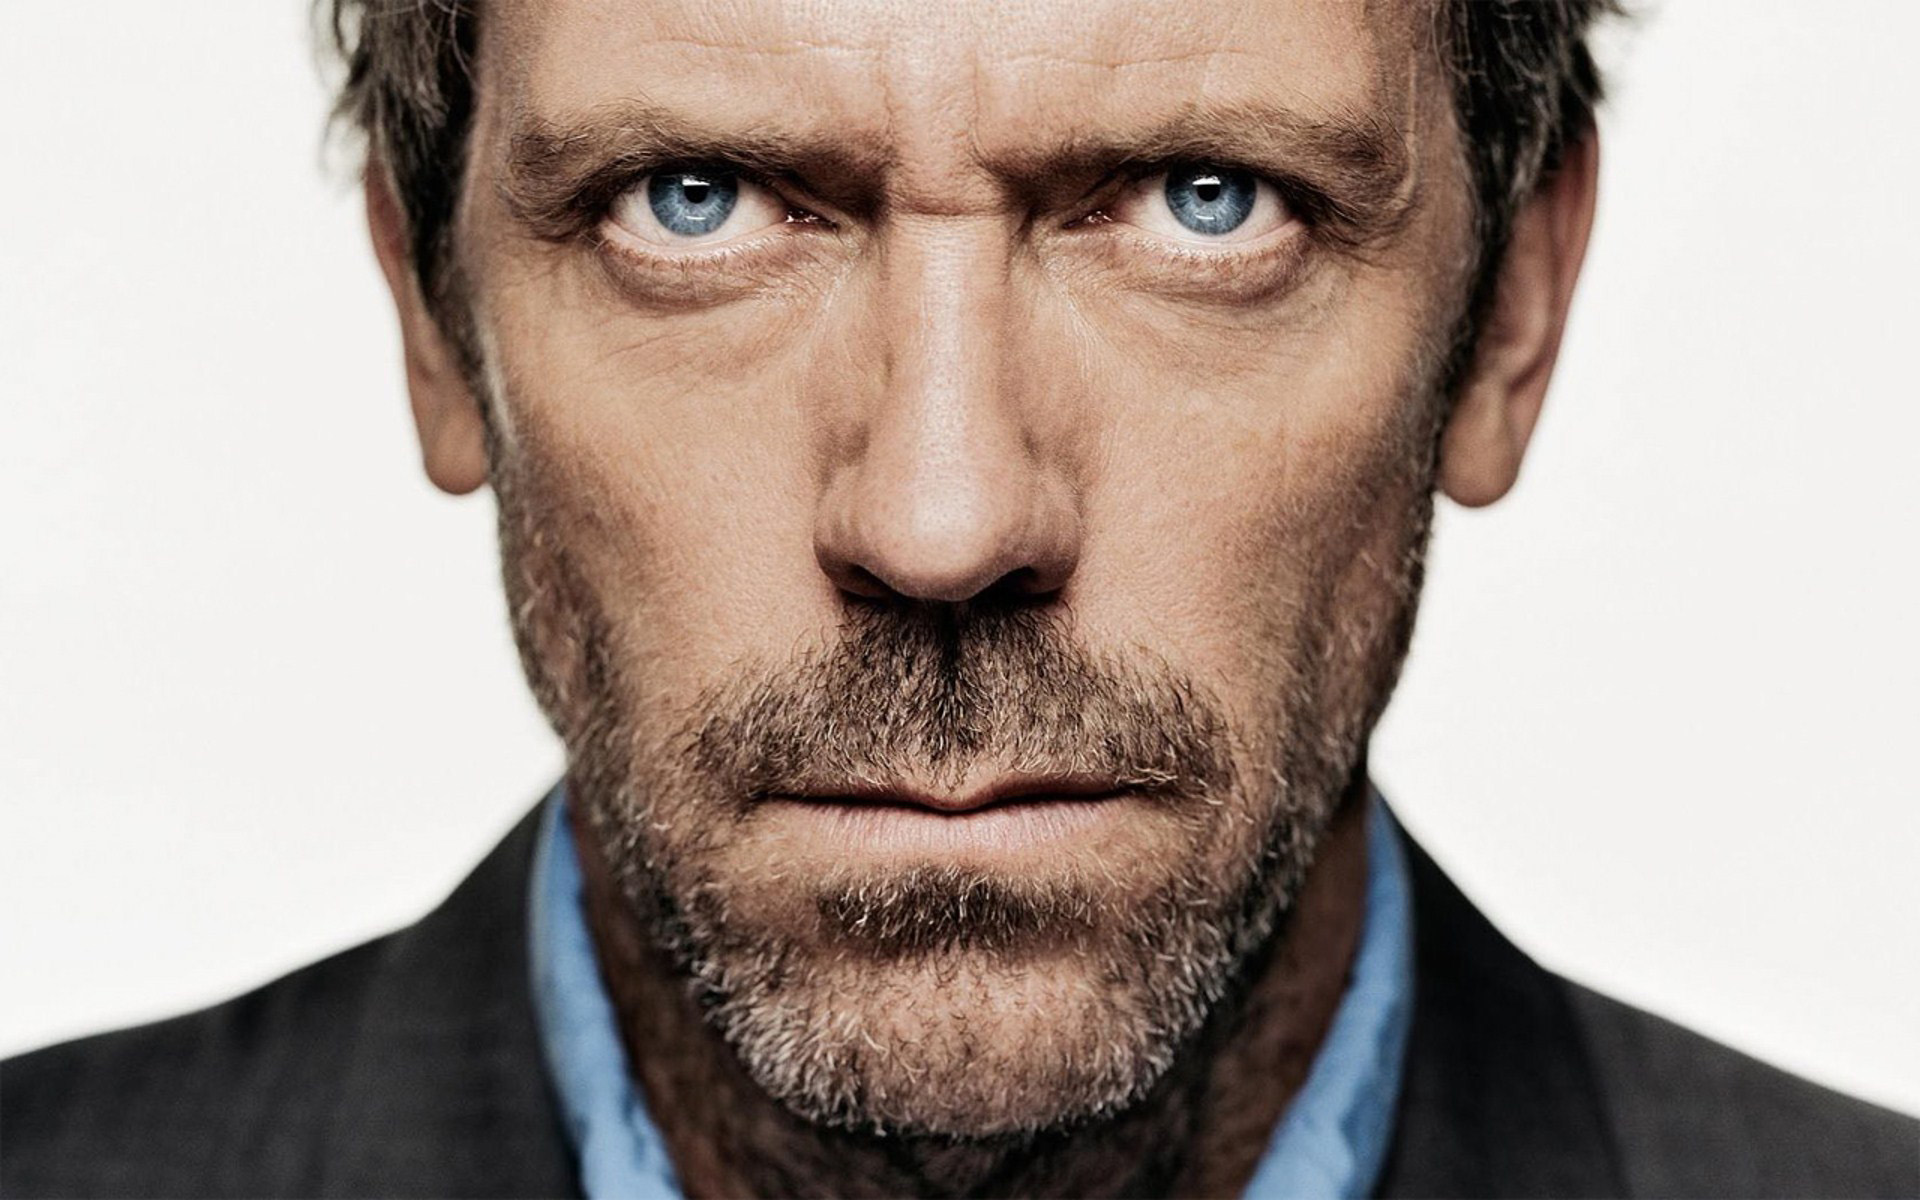 Hugh Laurie portraying the character Gregory House from the TV show House.